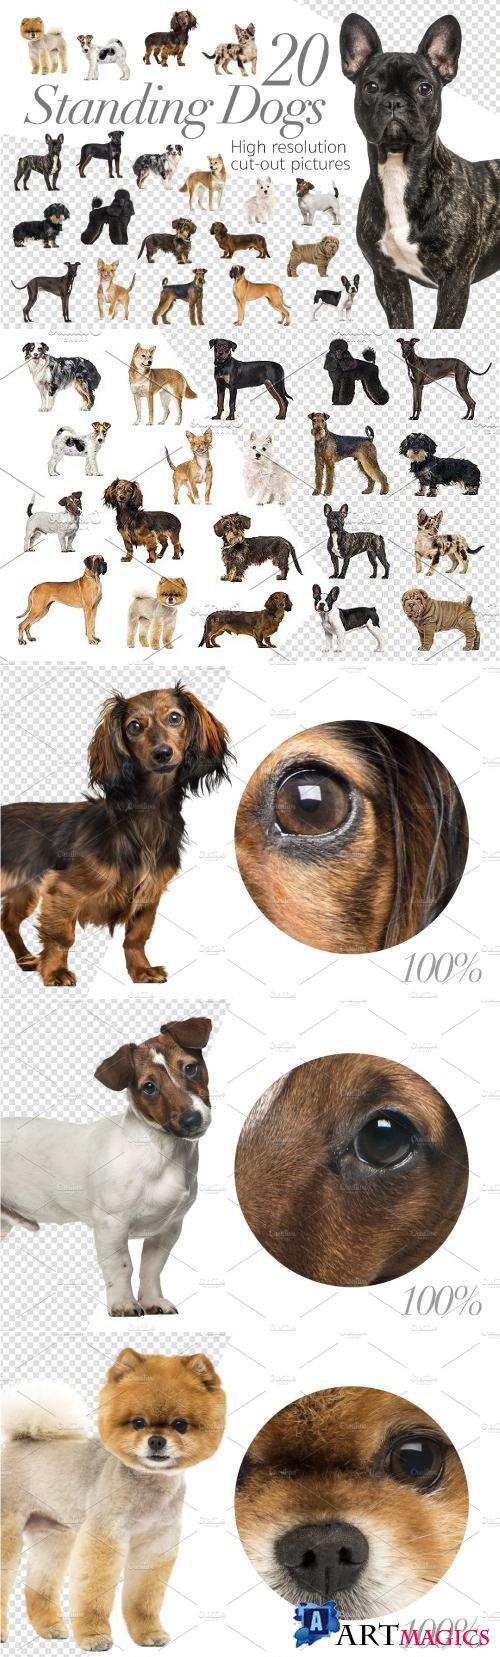 20 Standing Dogs - Cut-out Pictures - 2261997